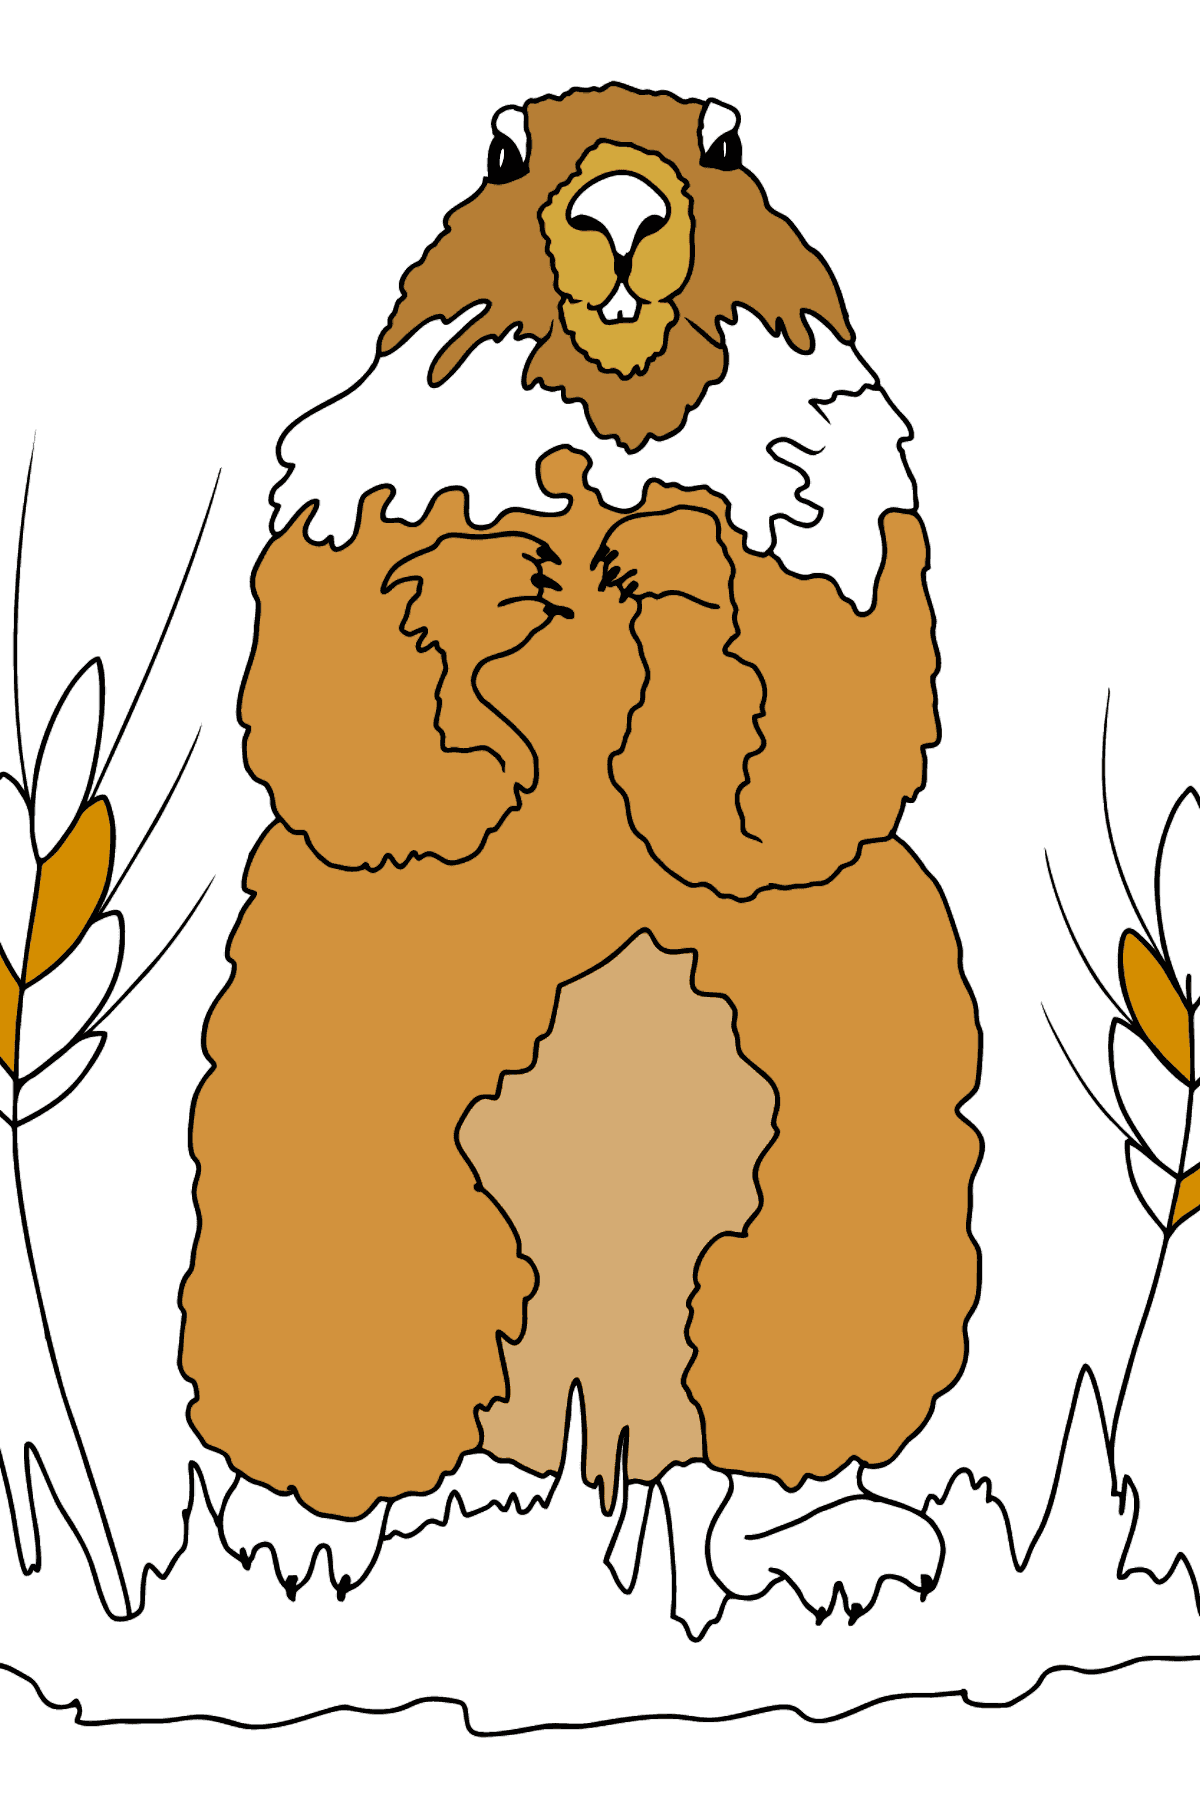 Coloring Page - A Groundhog is Looking Around - Coloring Pages for Kids